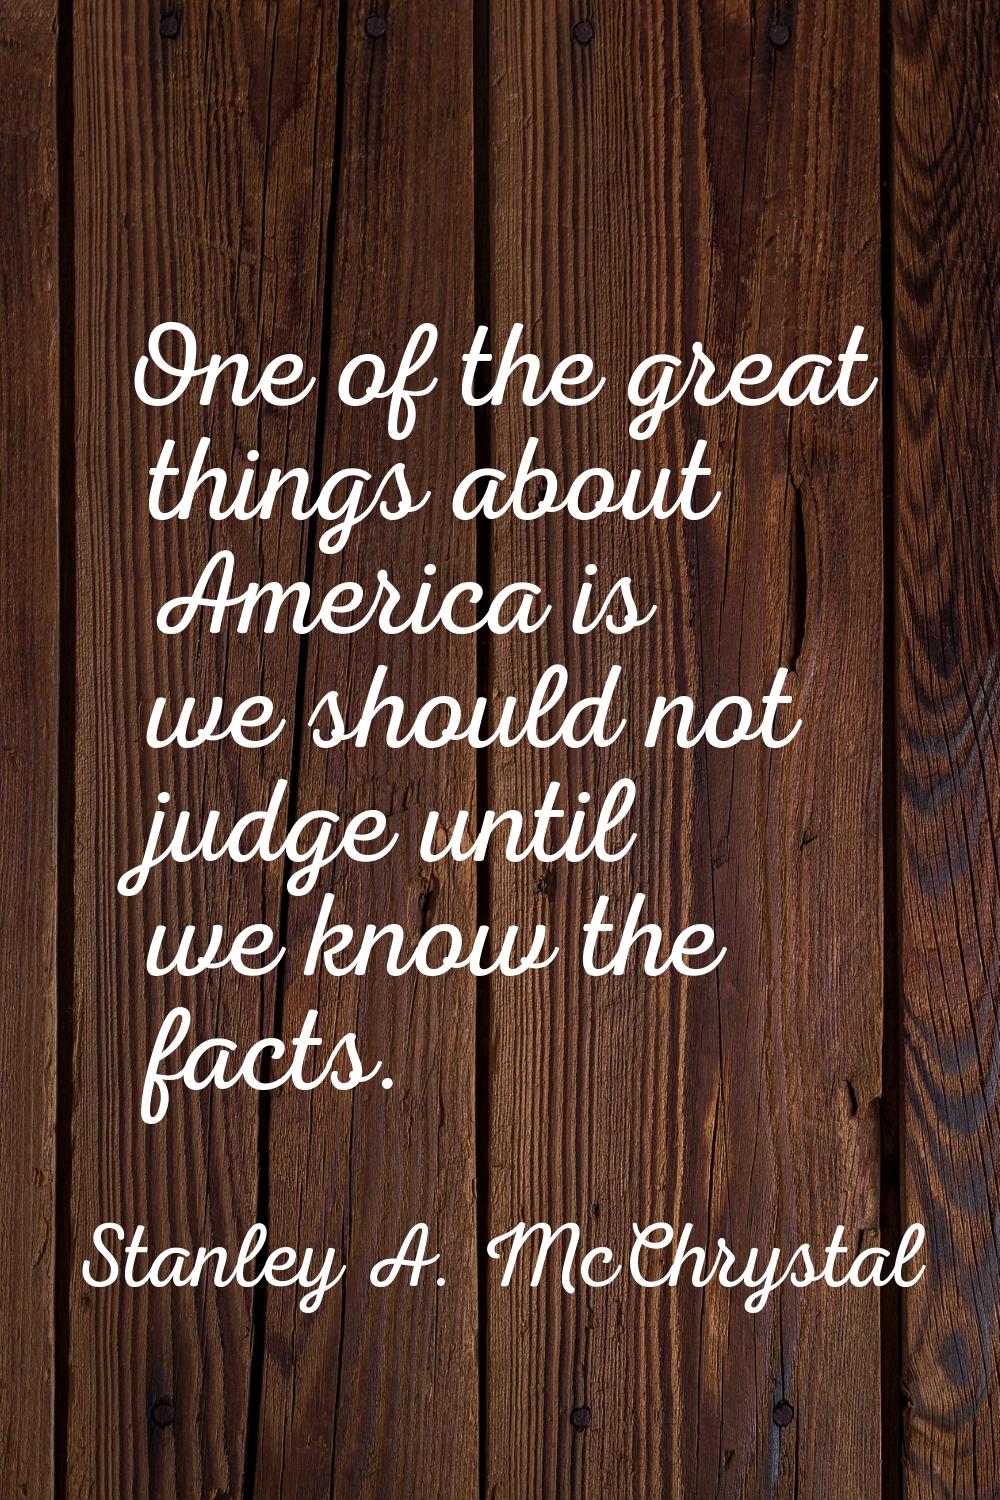 One of the great things about America is we should not judge until we know the facts.